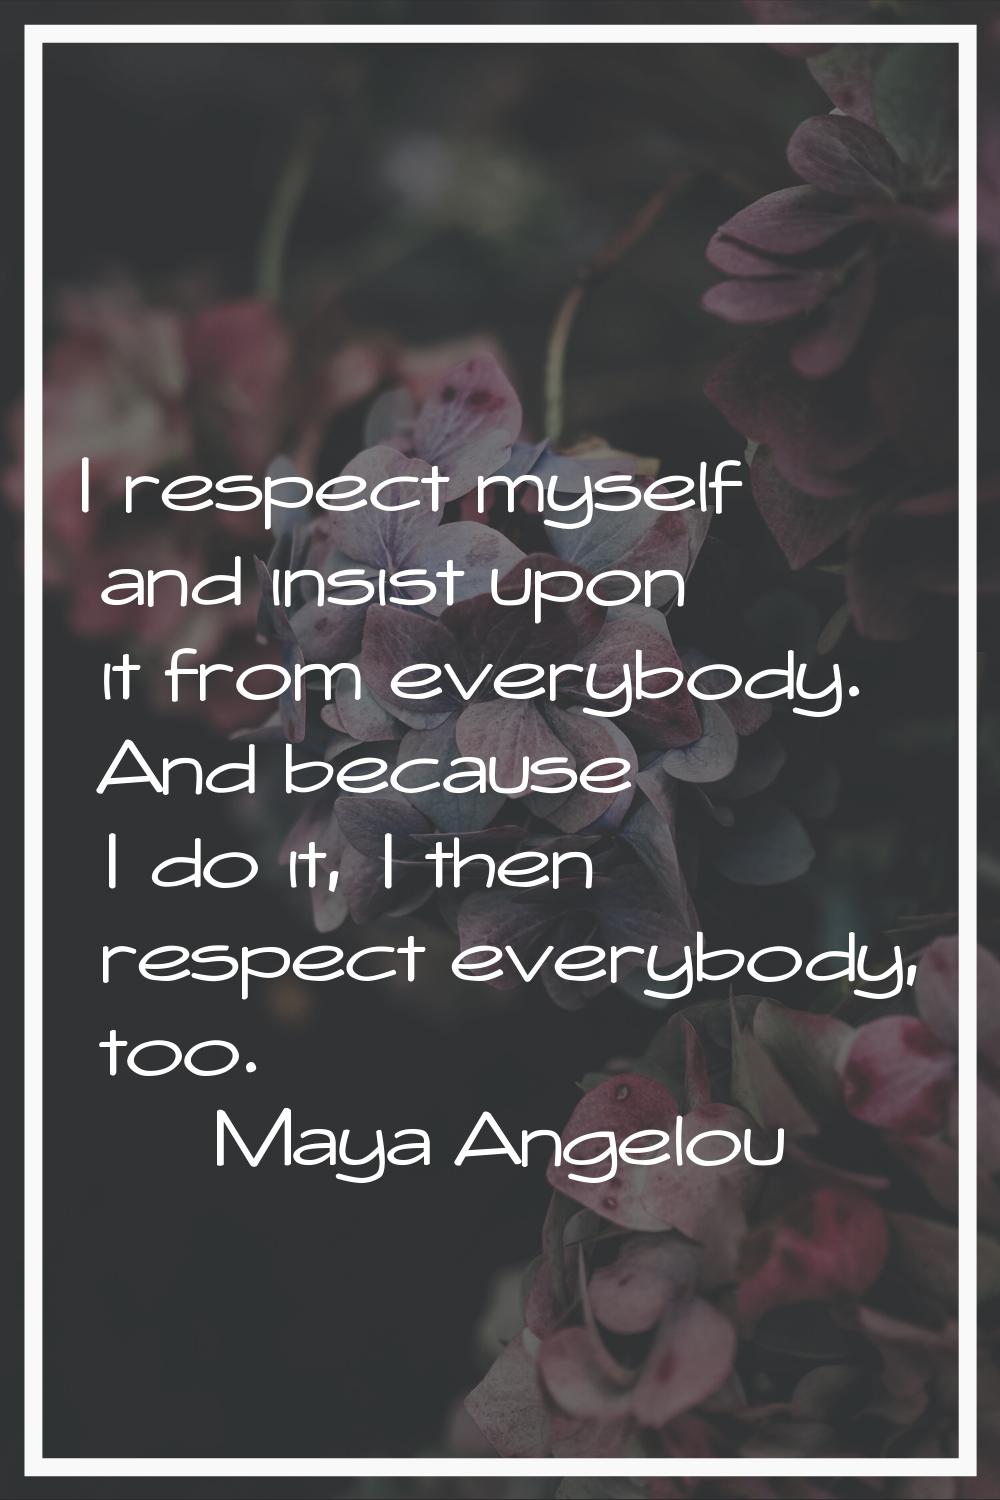 I respect myself and insist upon it from everybody. And because I do it, I then respect everybody, 